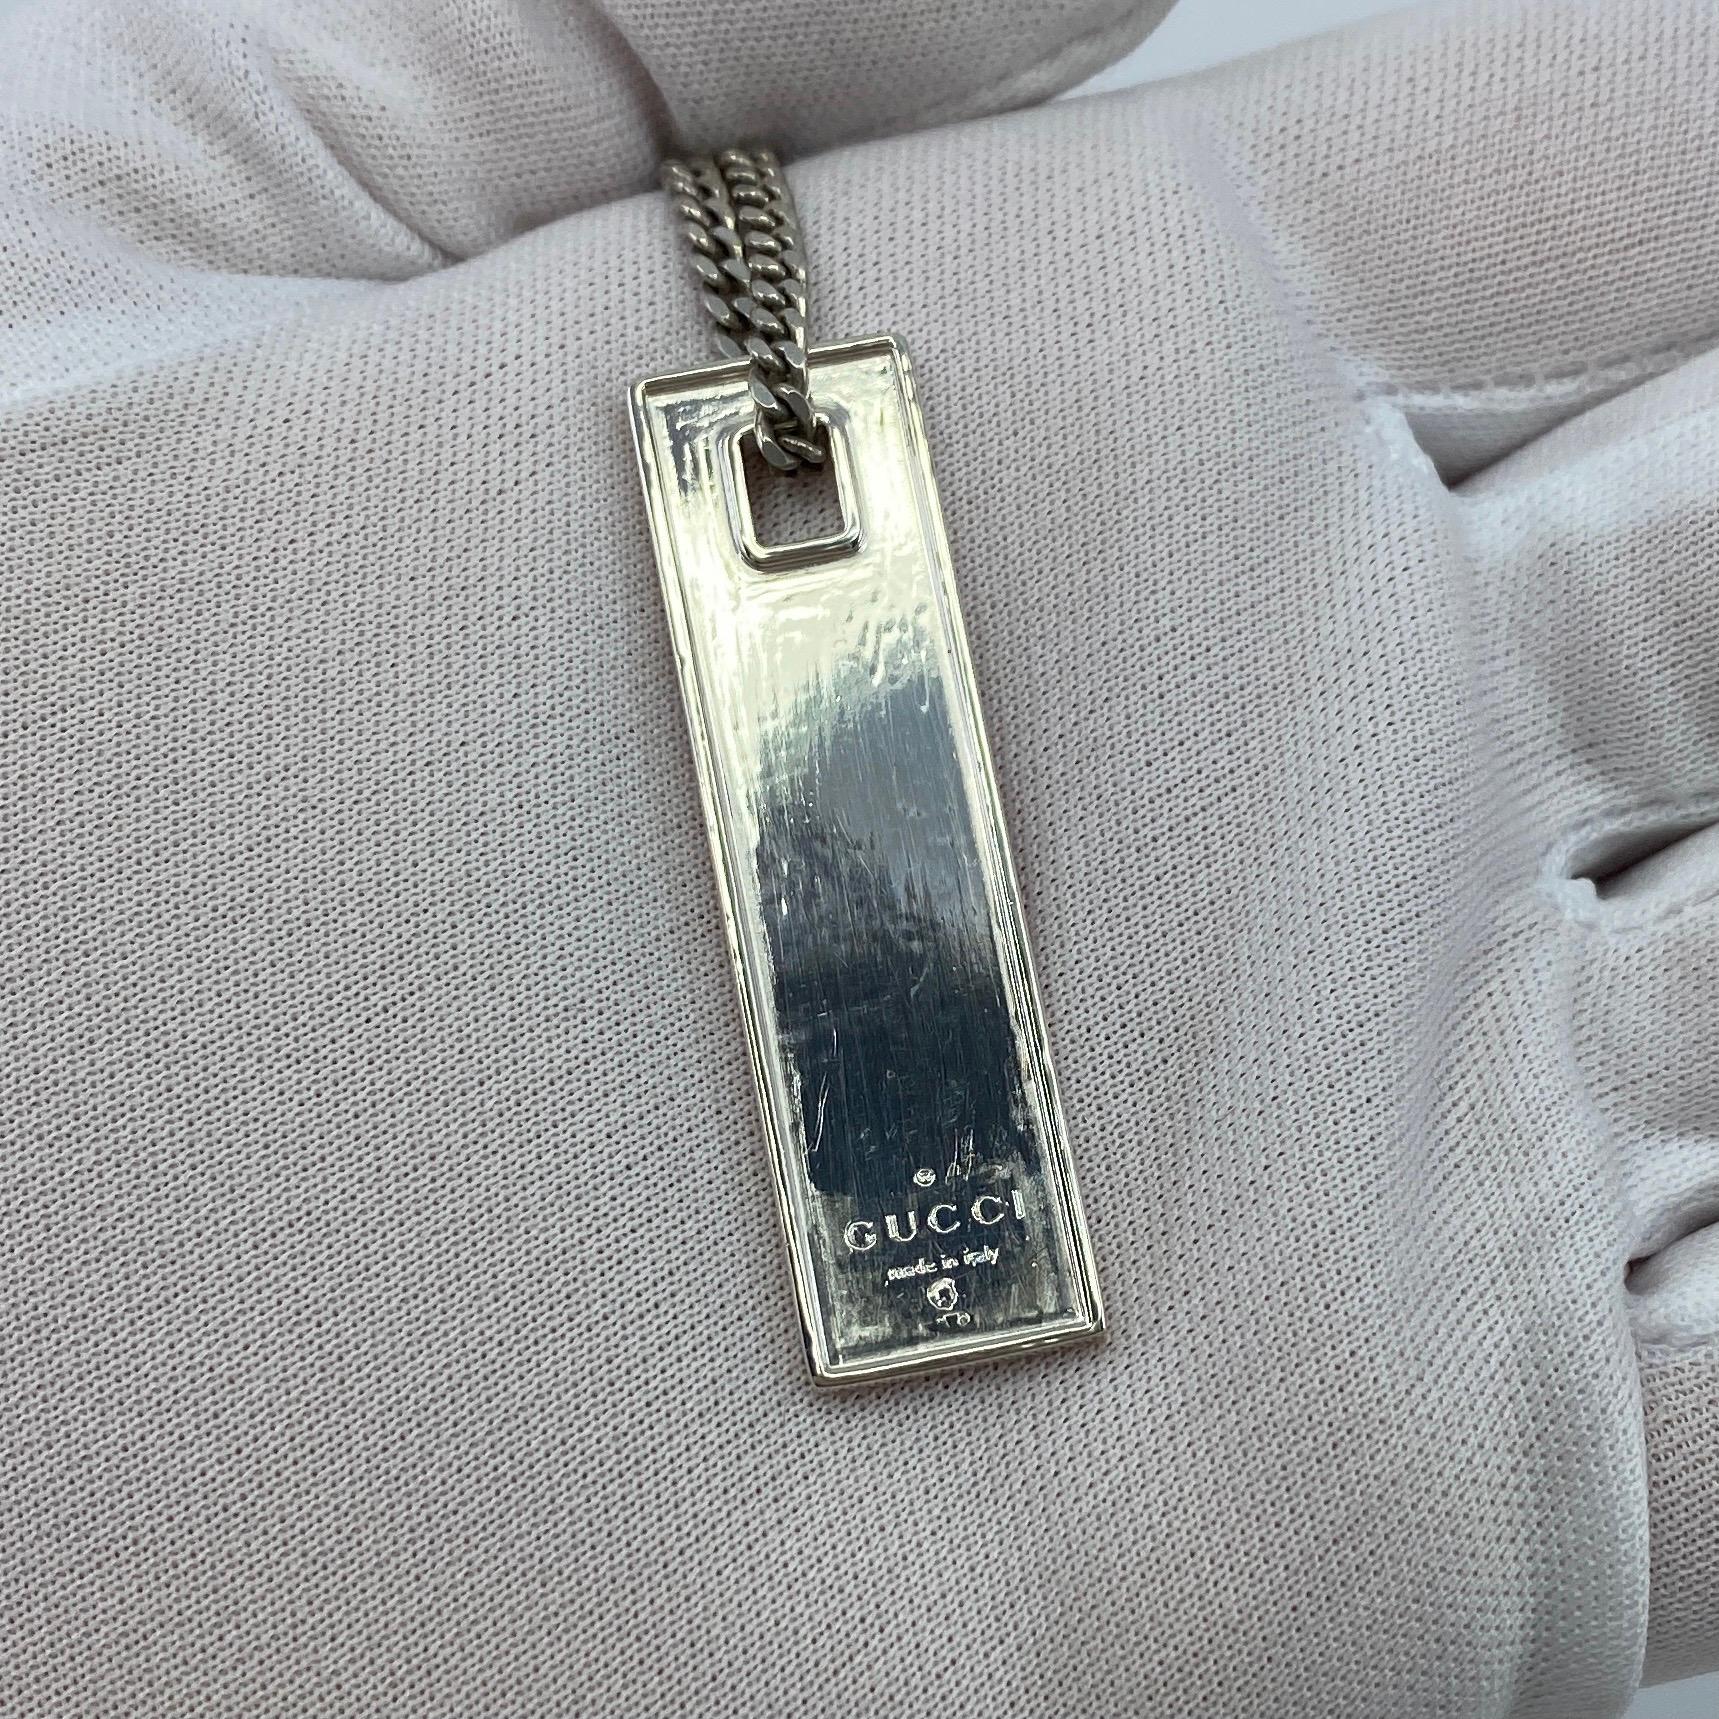 Vintage Gucci Sterling Silver Tag Pendant Necklace.

Used item, some minor scratches on it. Has been professionally cleaned and polished so very bright and shiny. 
Bracelet measures 50cm (20inch). Weighs 19.8g.
The tag measures 45x12mm

Italian